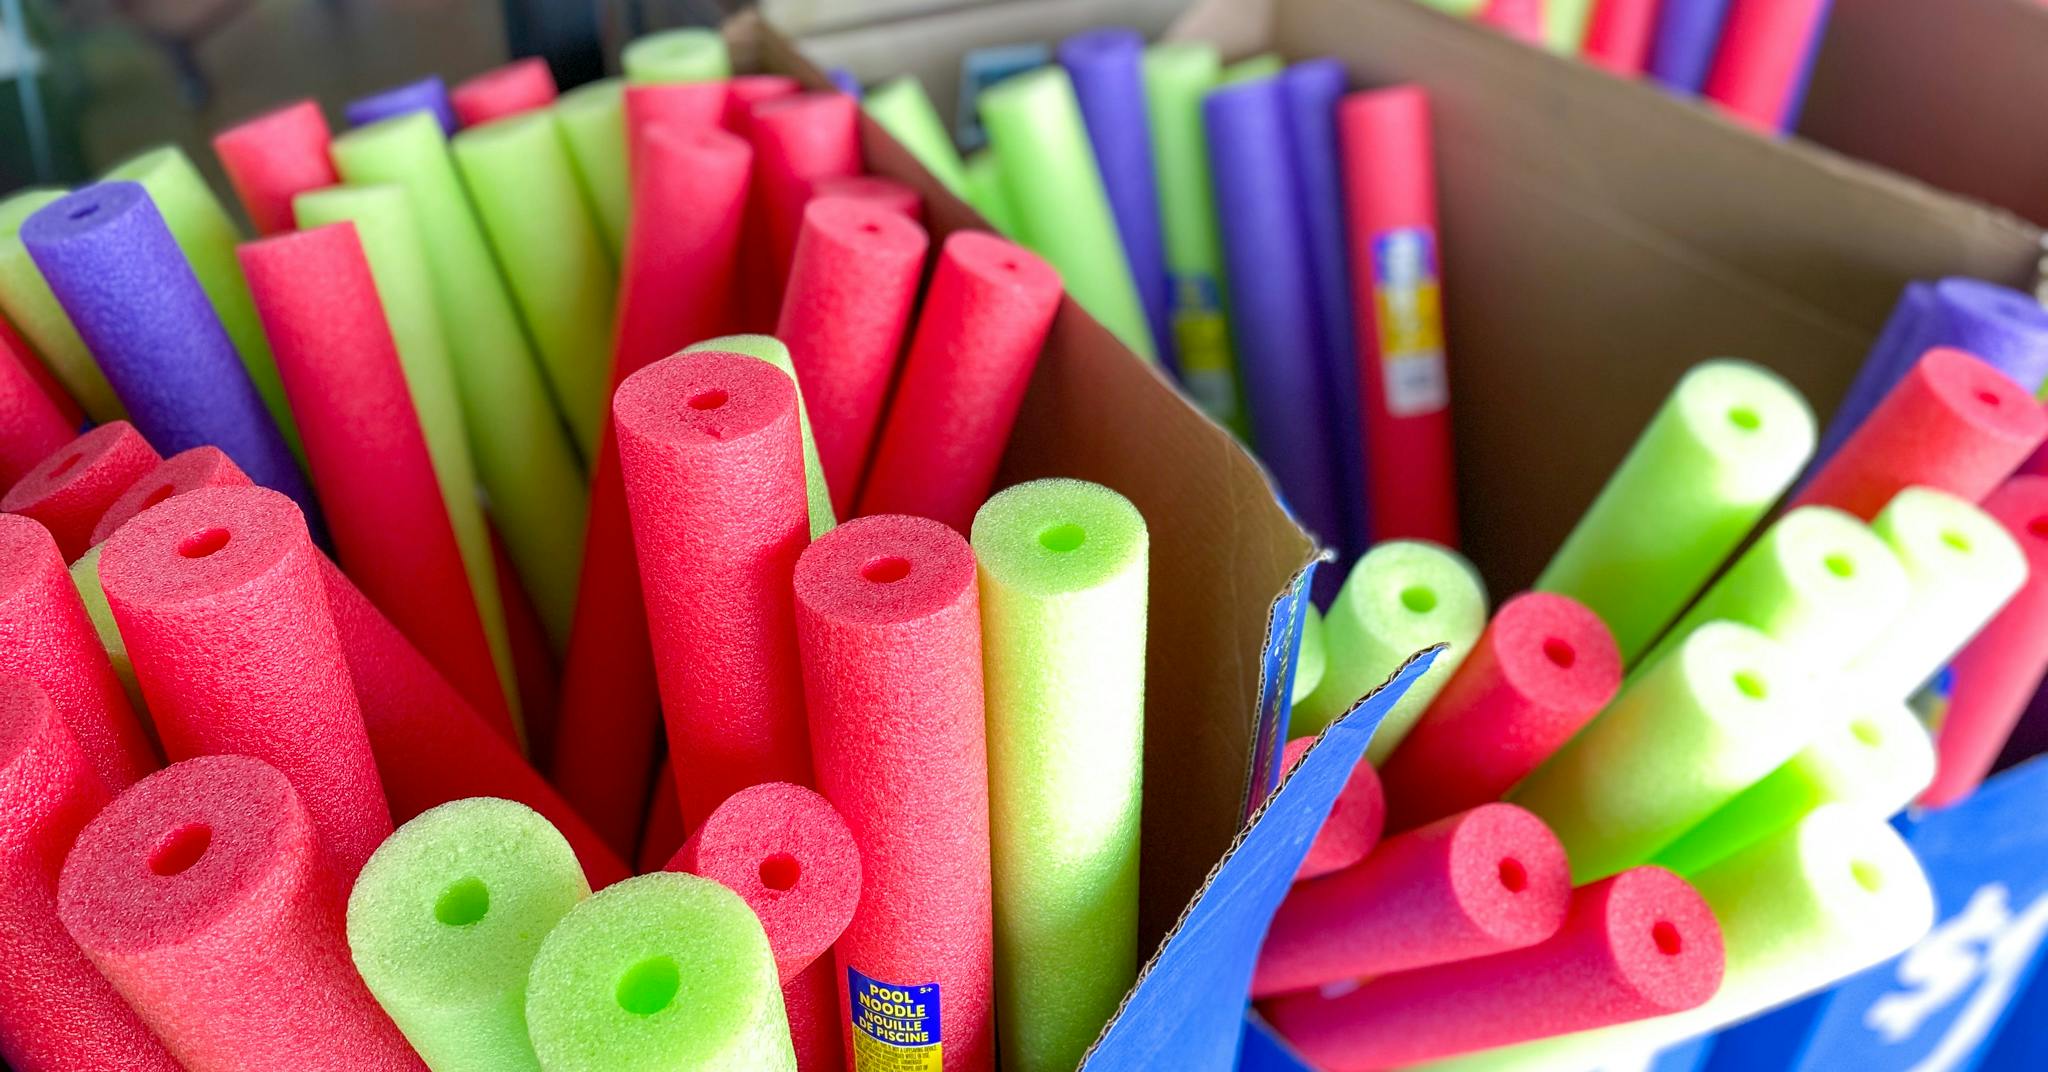 Pool Noodles - Now Available at Dollar Tree - The Krazy Coupon Lady